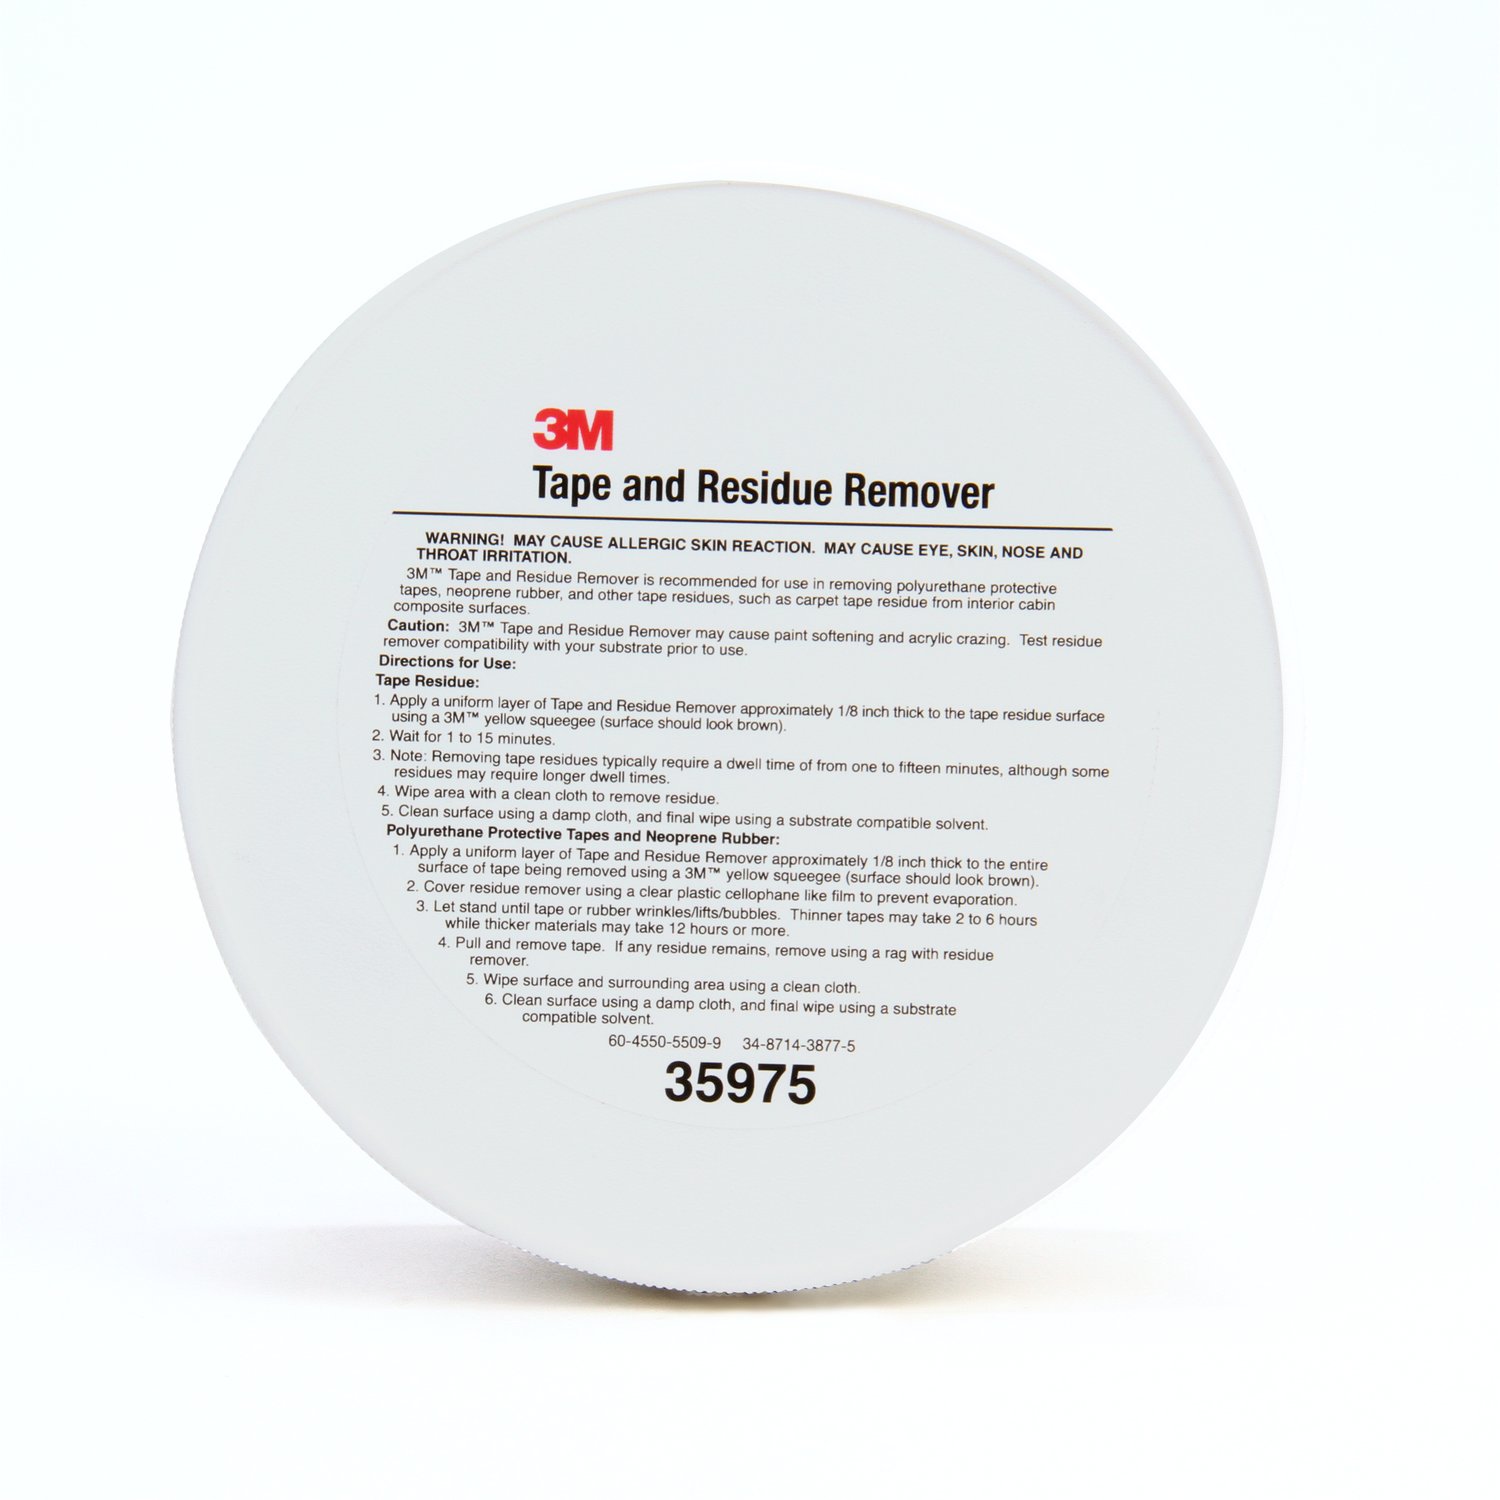 7000045520 - 3M Tape and Residue Remover, 1 pt (16 oz/473 mL), 6 per case